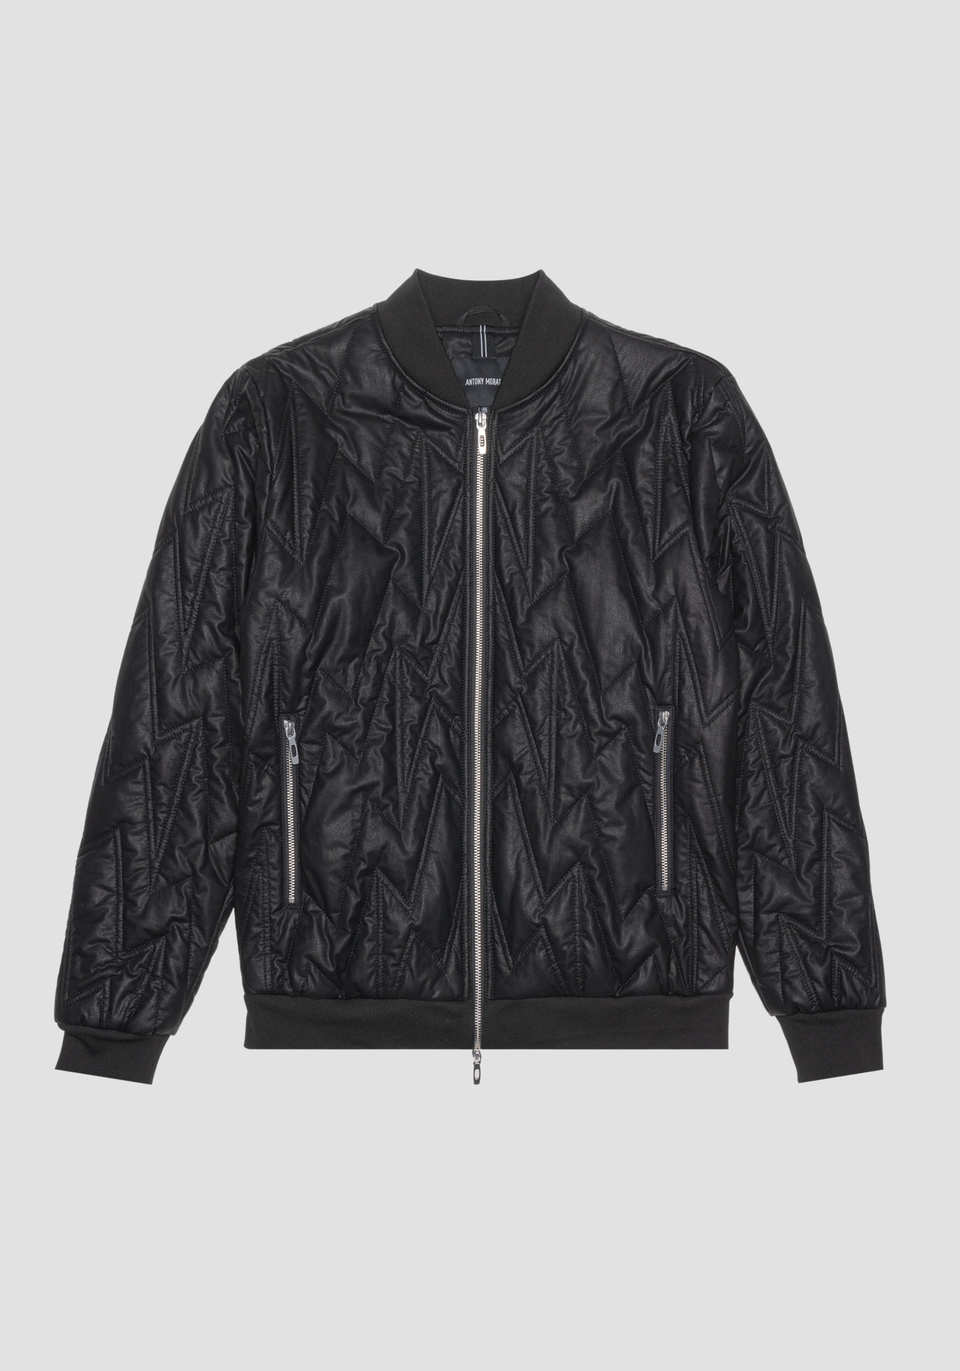 REGULAR-FIT JACKET IN LEATHER-EFFECT FABRIC WITH SUSTAINABLE PADDING - Antony Morato Online Shop